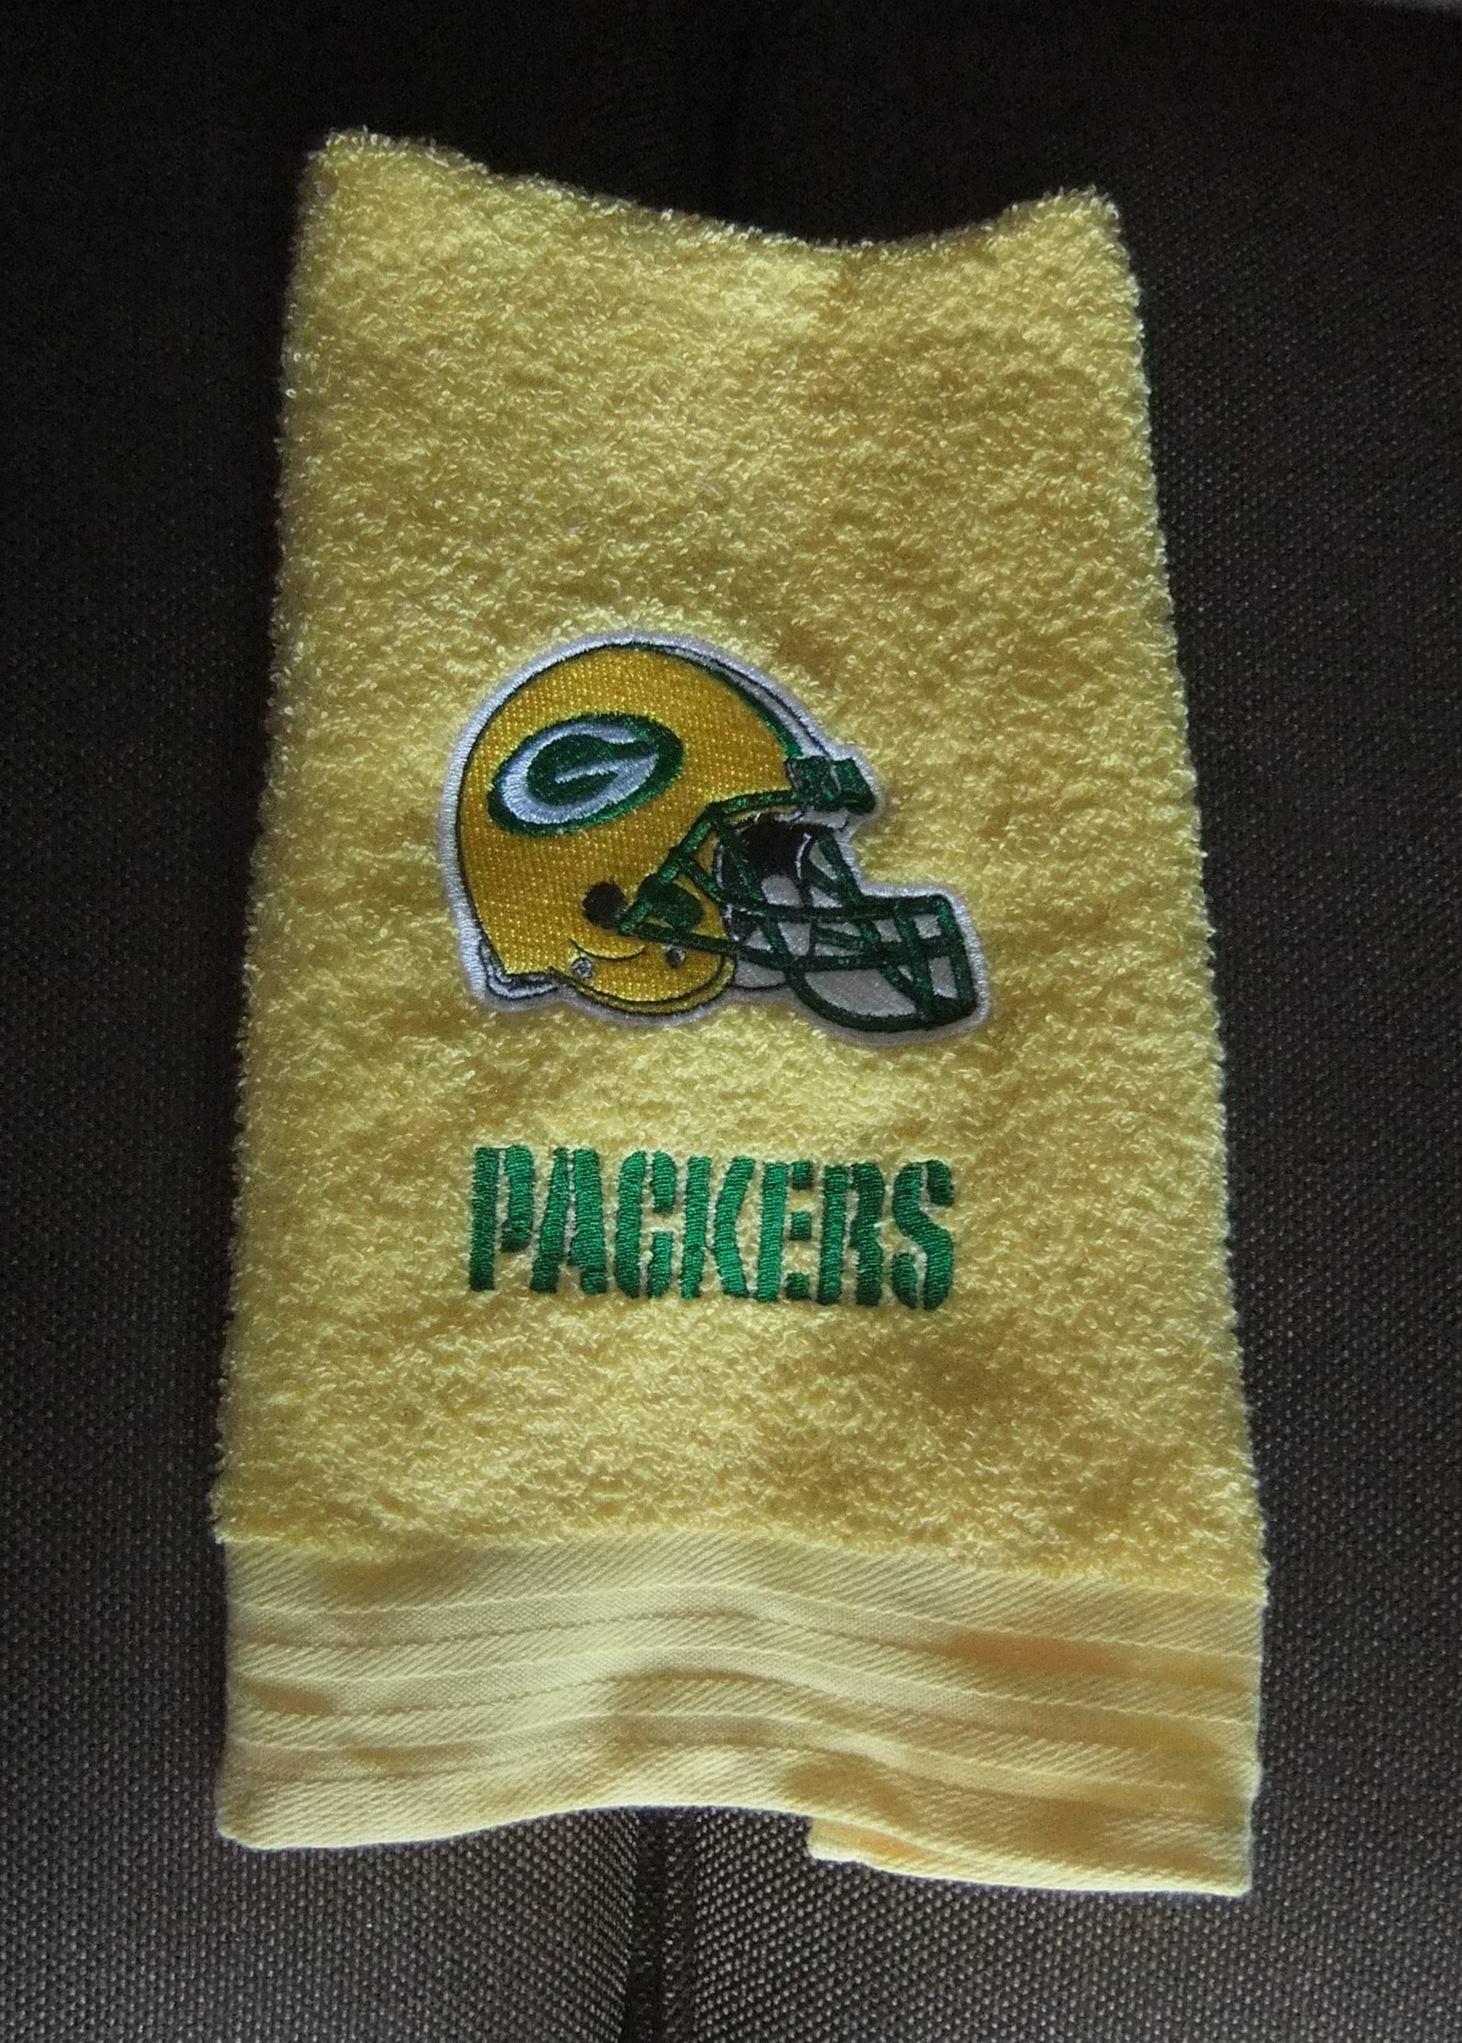 Green Bay Packers' logo on a towel